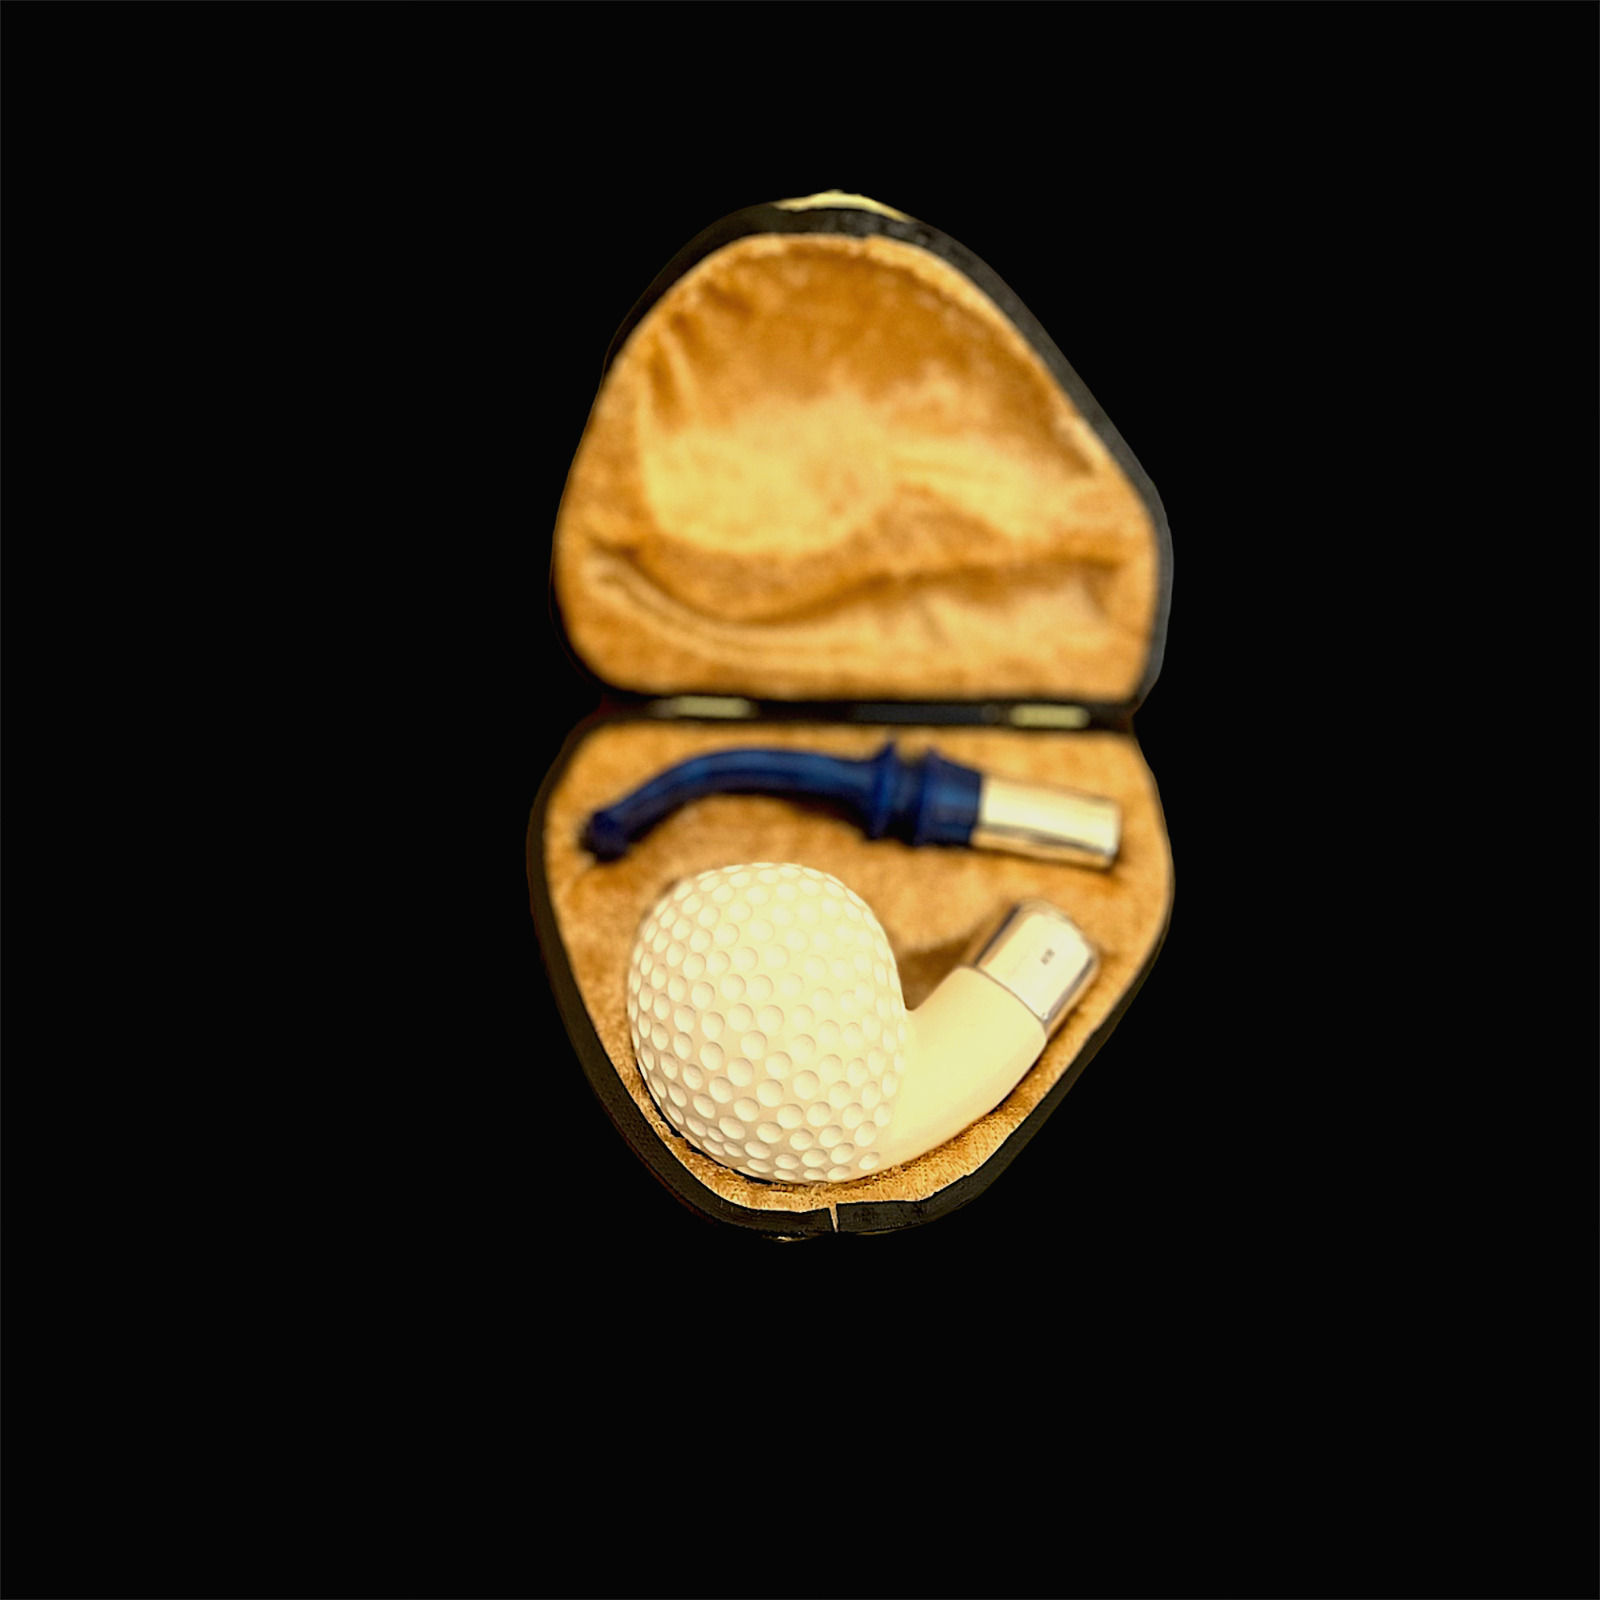 Block Meerschaum Pipe 925 silver unsmoked smoking tobacco pipe w case MD-304